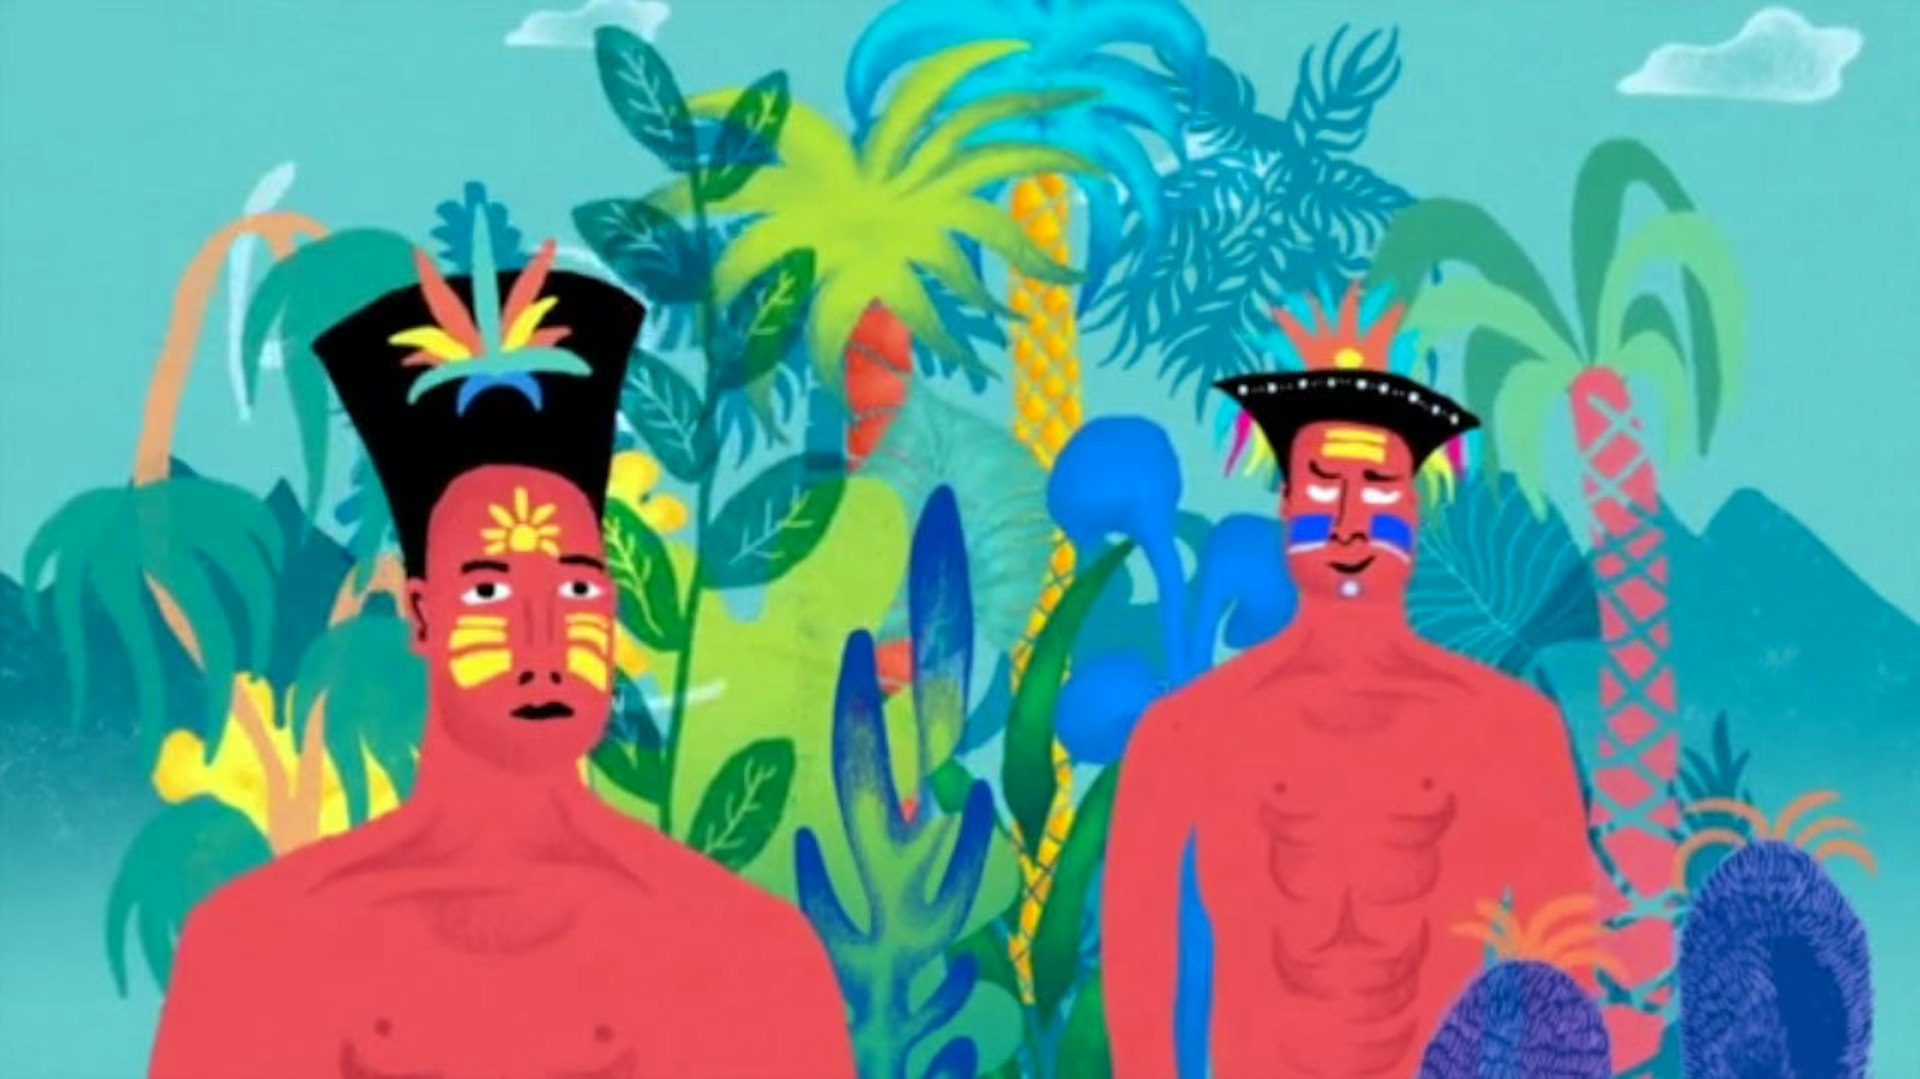 New animation! Tips from the jungle that will make you live life better in the city